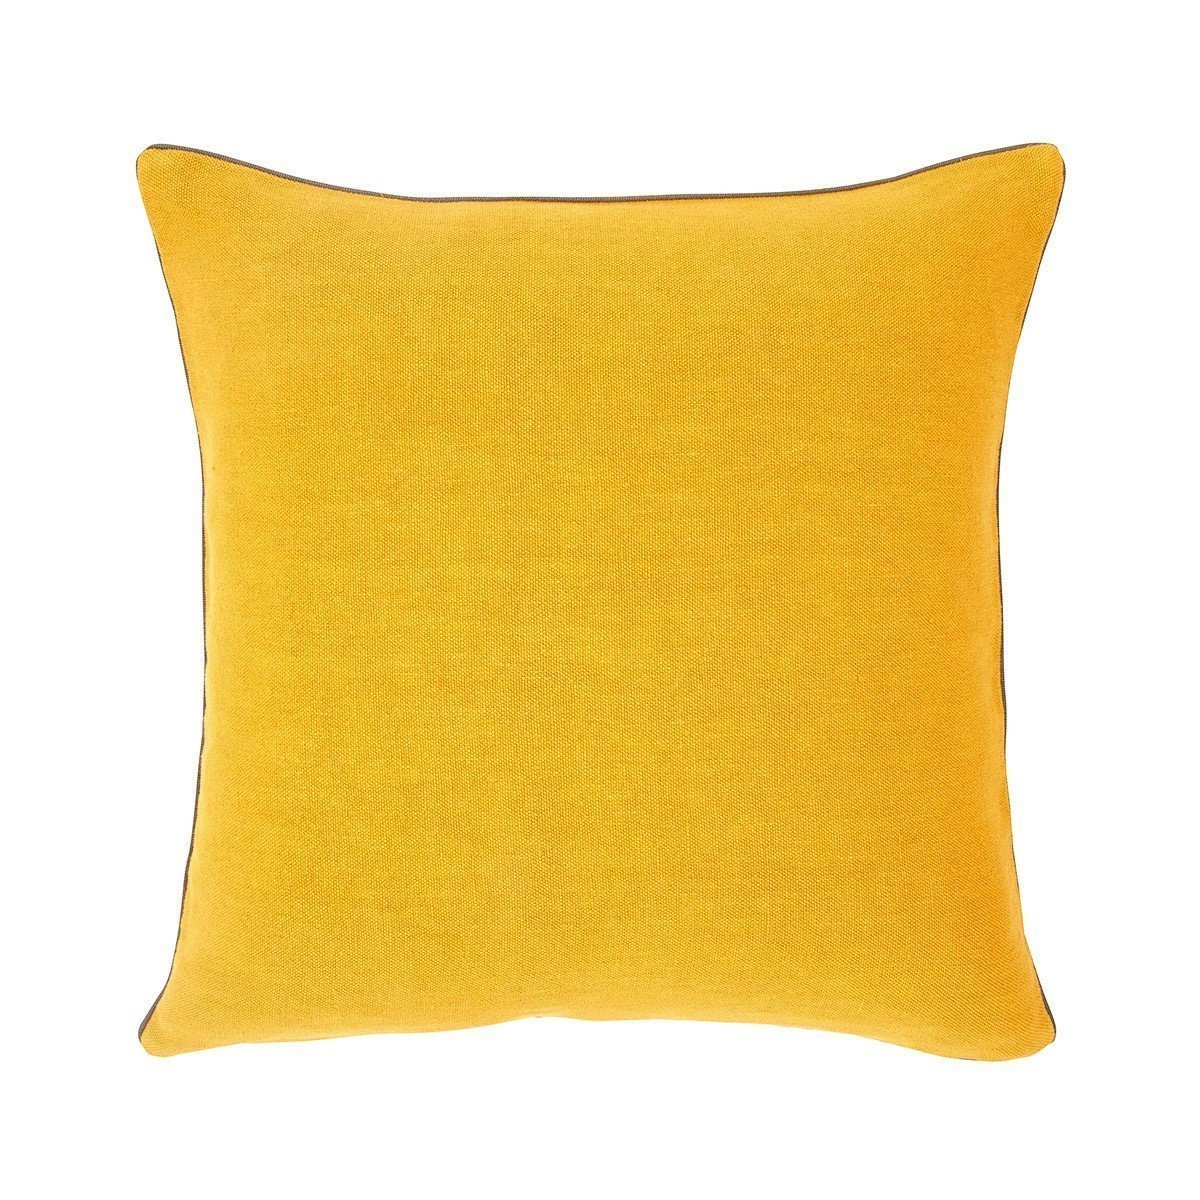 Pigment Jaune D'or Yellow Throw Pillow by Iosis | Fig Linens - Front